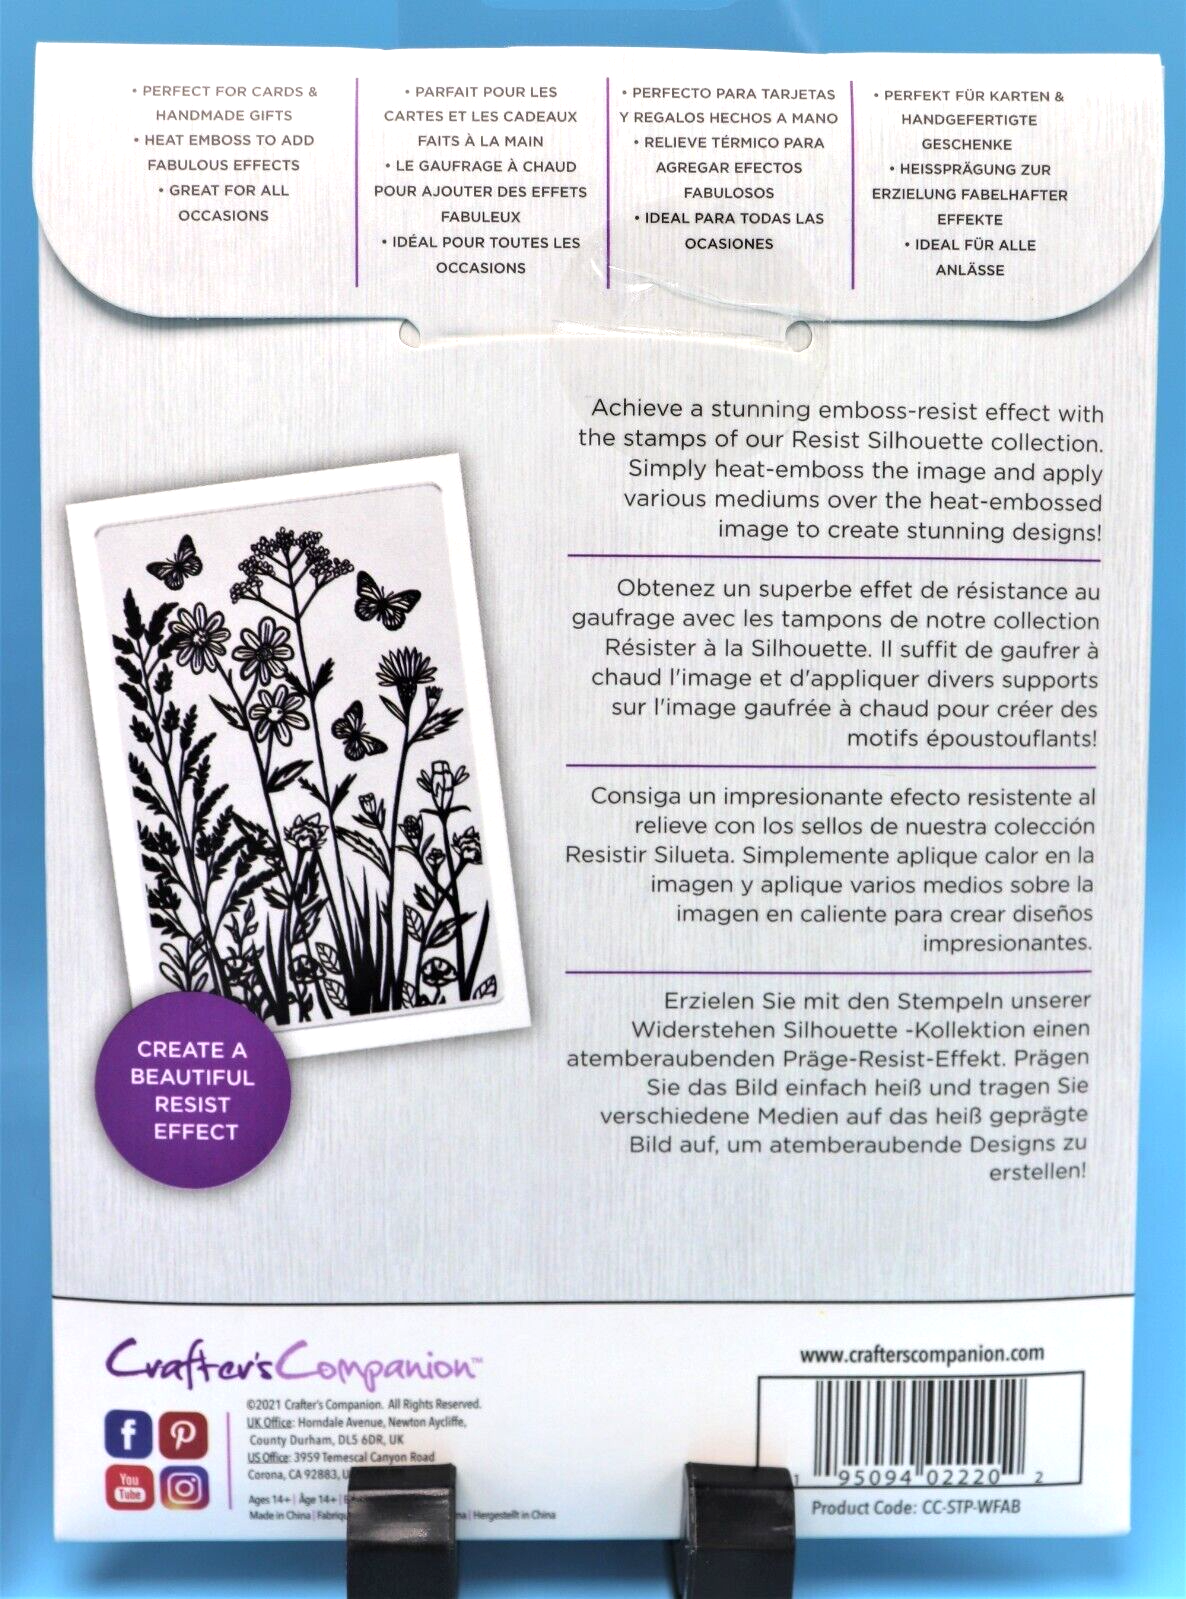 NEW Crafter's Companion Resist Silhouette Photopolymer Stamp Collection Crafter's Companion - фотография #7